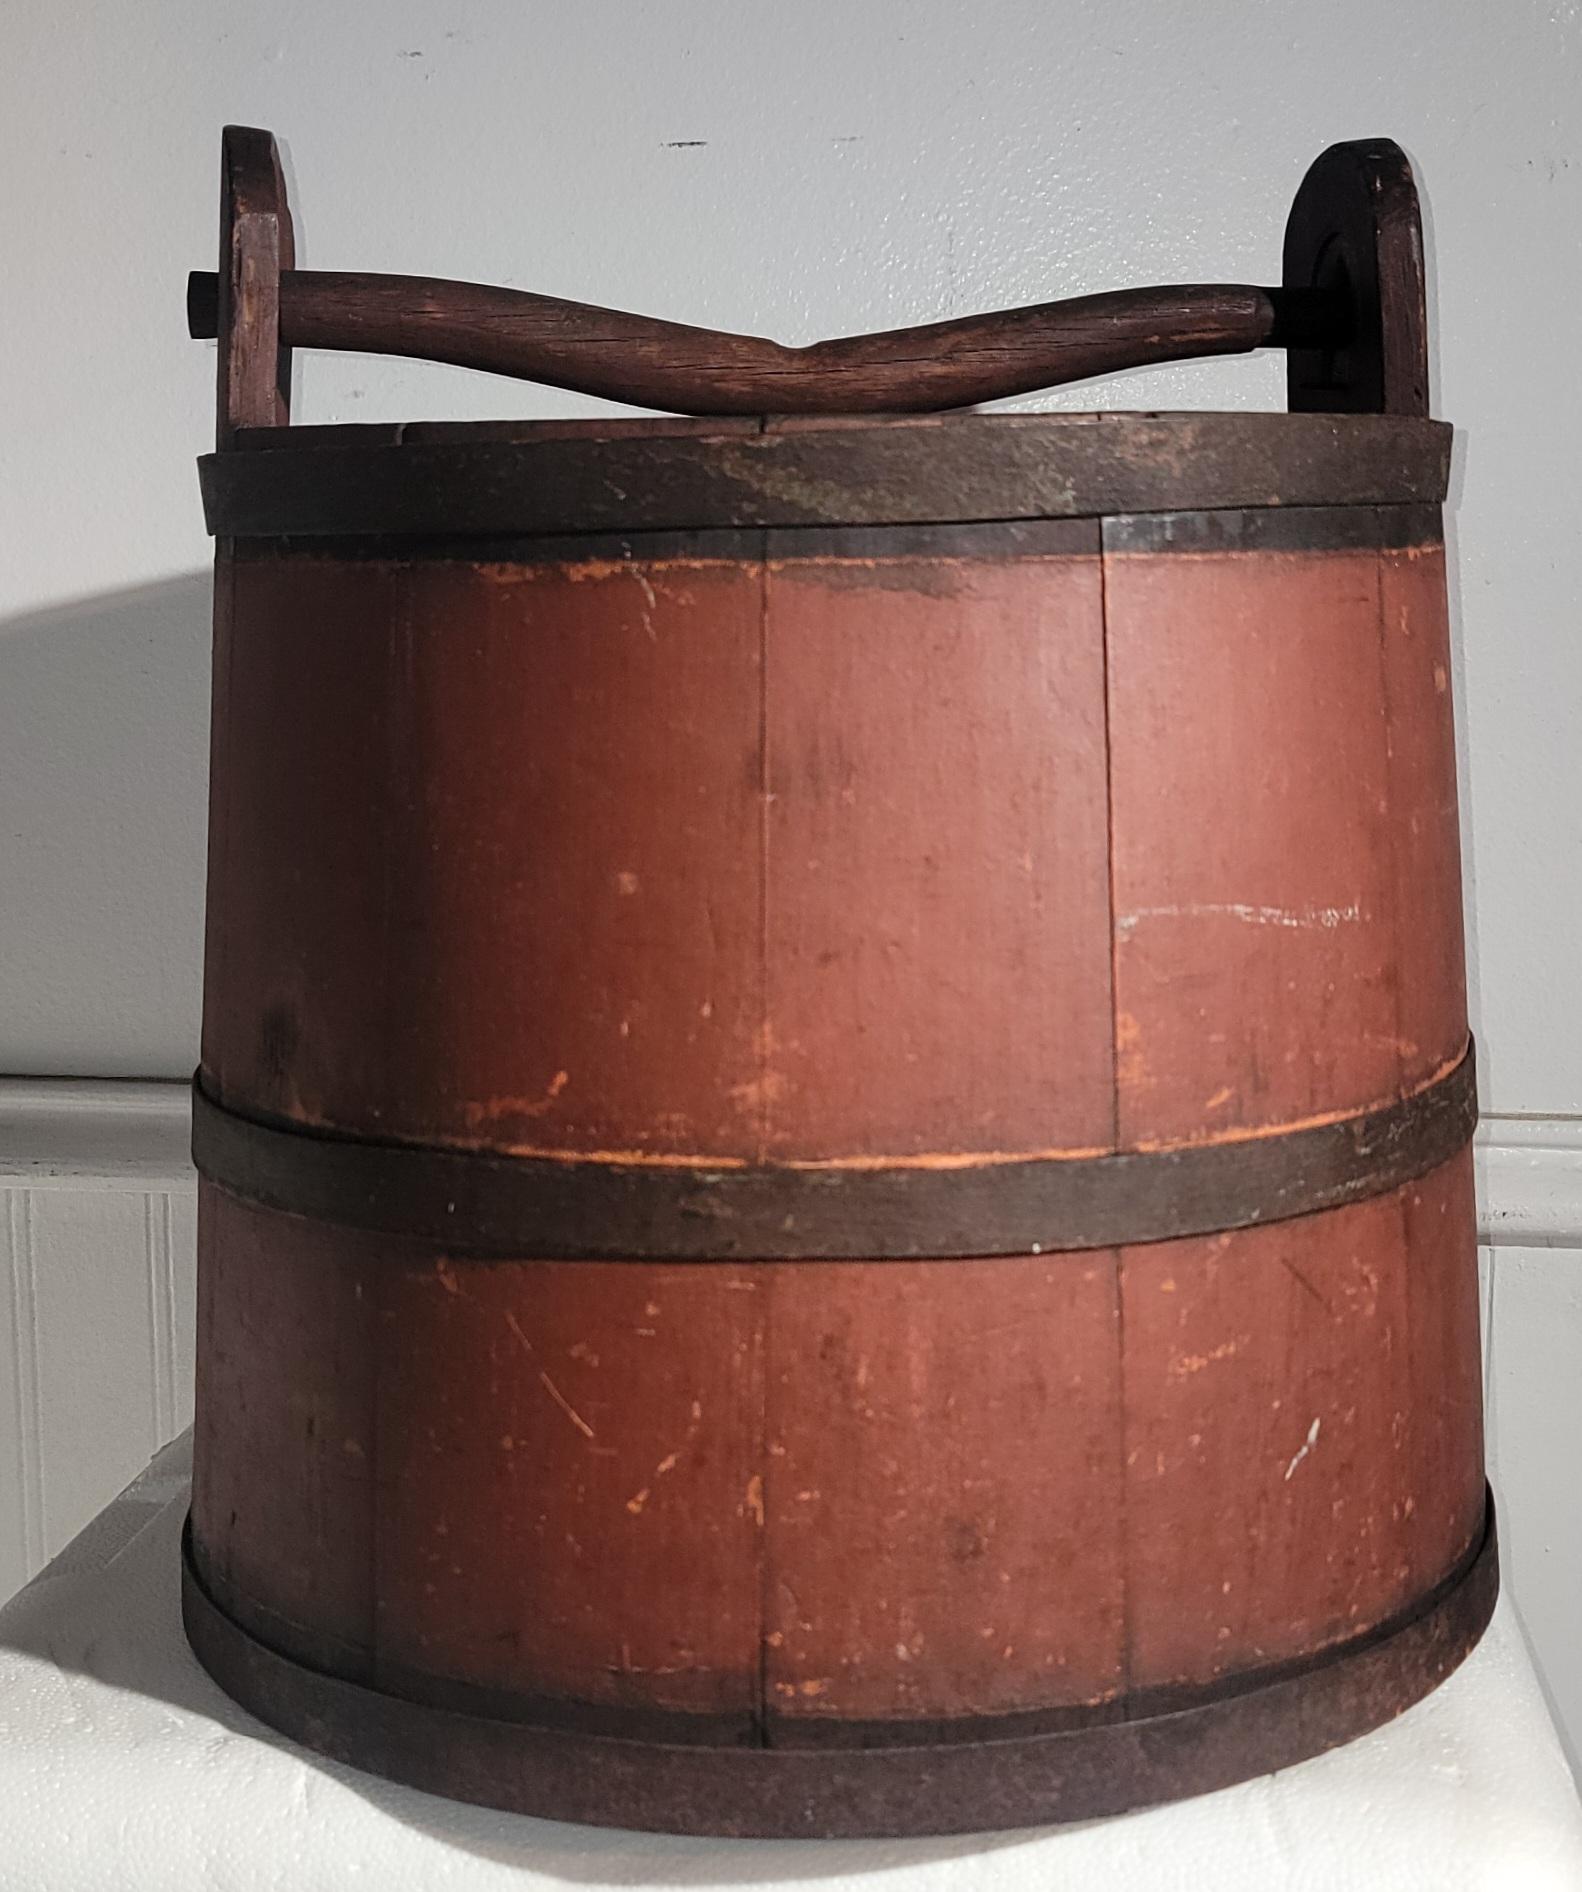 Signed & dated 1848 -WP original water bucket with the original wood handle.This hand made folky bucket has metal bands which keeps it tight together.